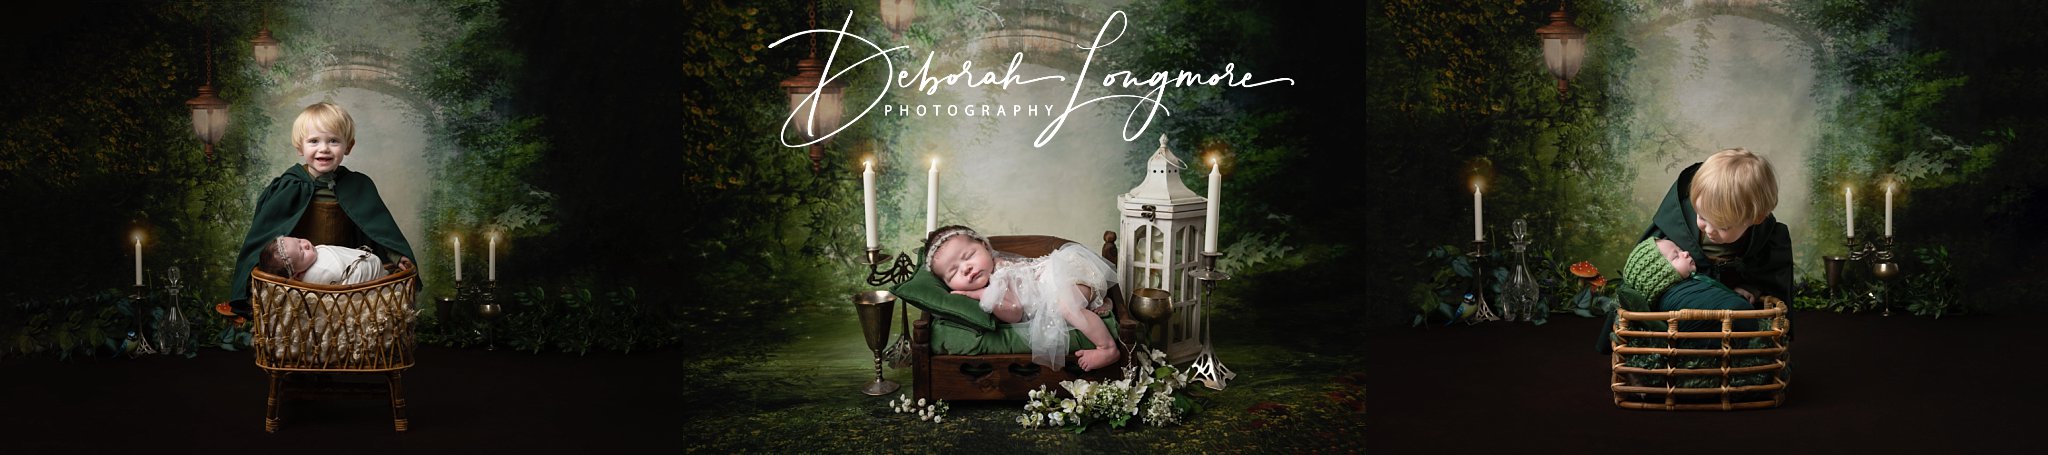 Lord of the Rings Newborn Photography, Hobbits, Hobbit newborn session, Lord of the Rings, Elf, Siblings, Newborn Photography